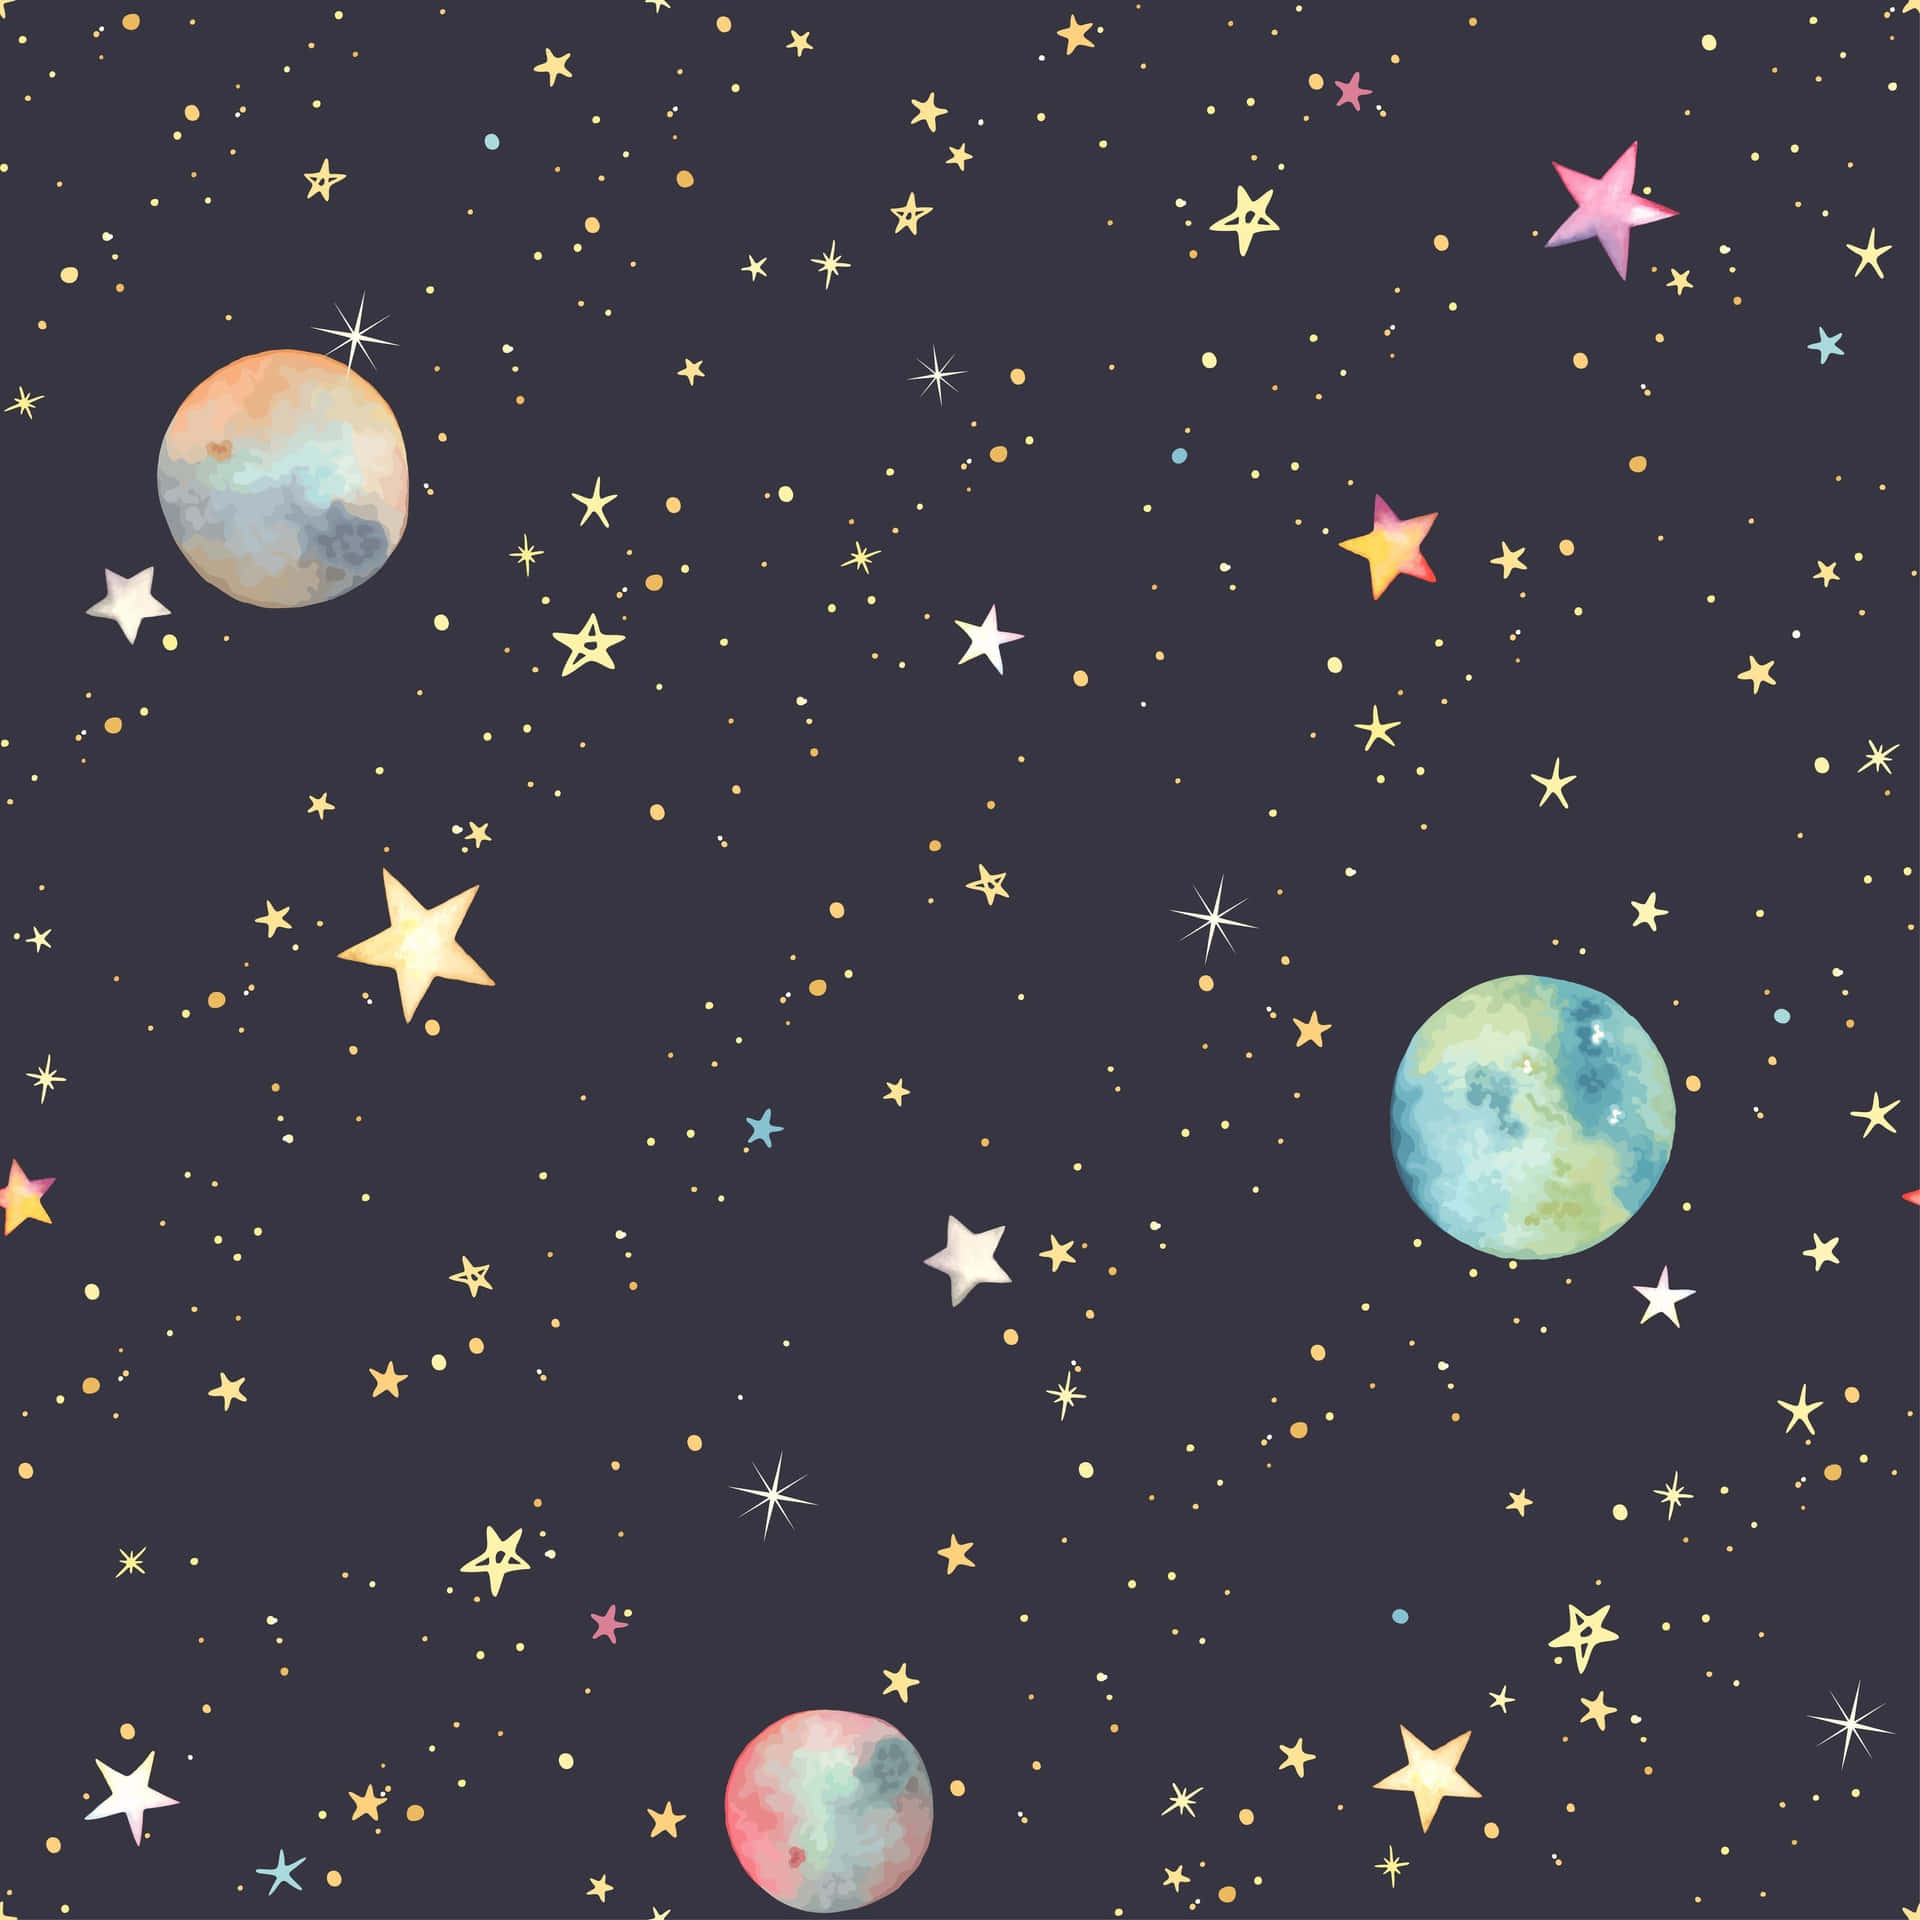 A Galaxy Wallpaper With Stars And Planets